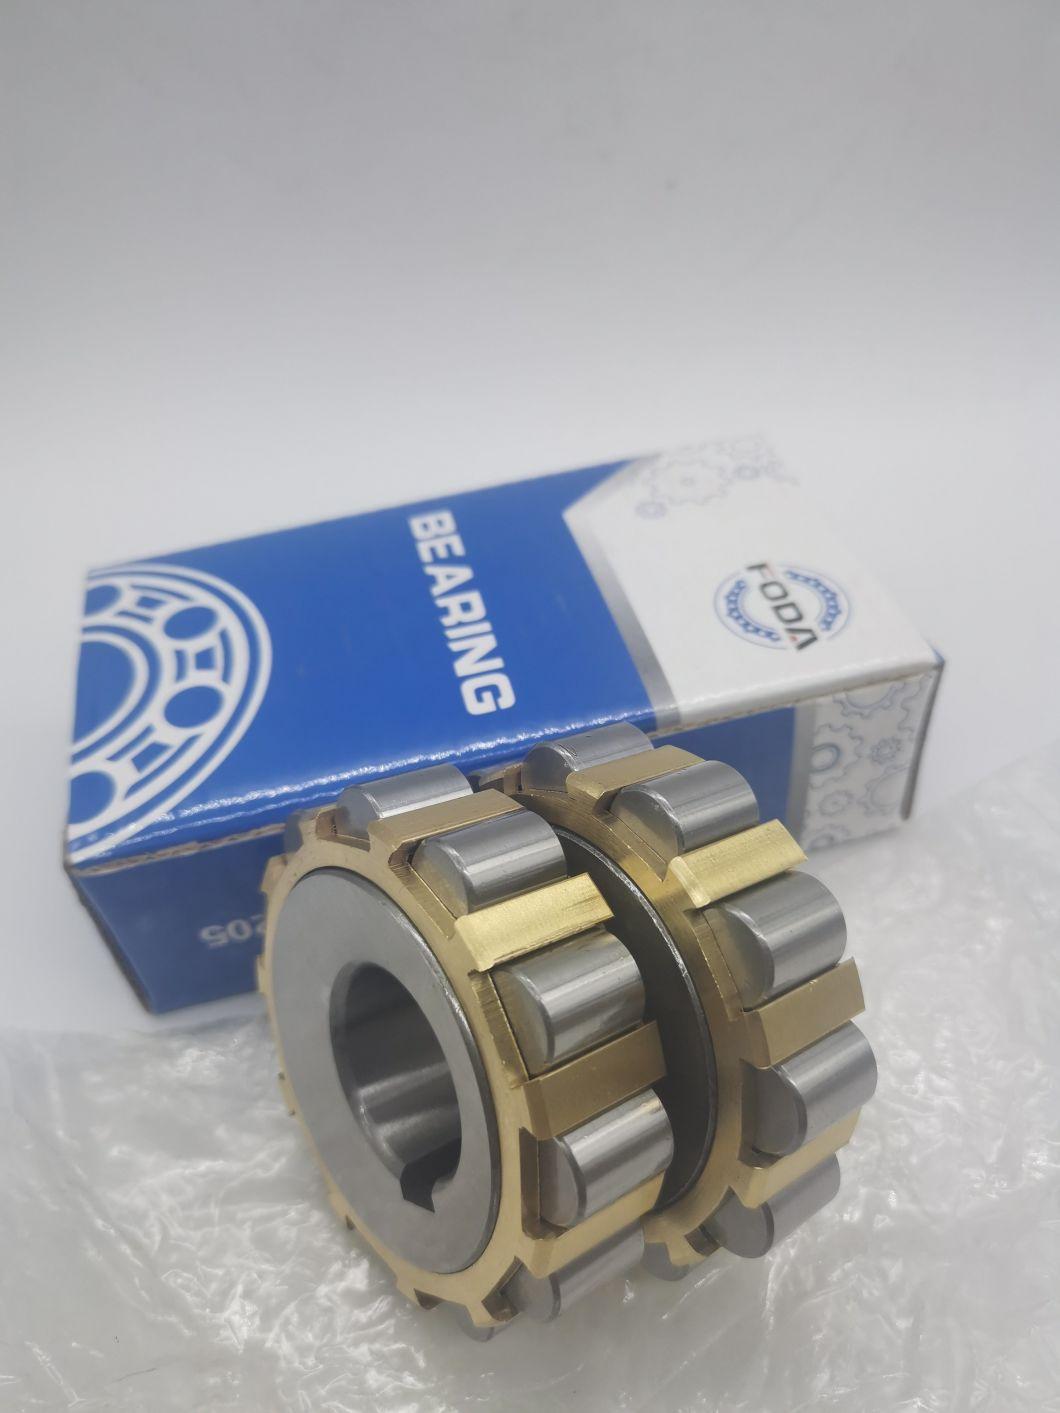 Double Row Eccentric Bearing Rn208 Cylindrical Roller Bearing (22UZ8311 RN1010 RN1012 RN1014 RN1016 RV1018 RN1020 RN1024 RN202 RN203 RN204 RN205 RN206 RN208)